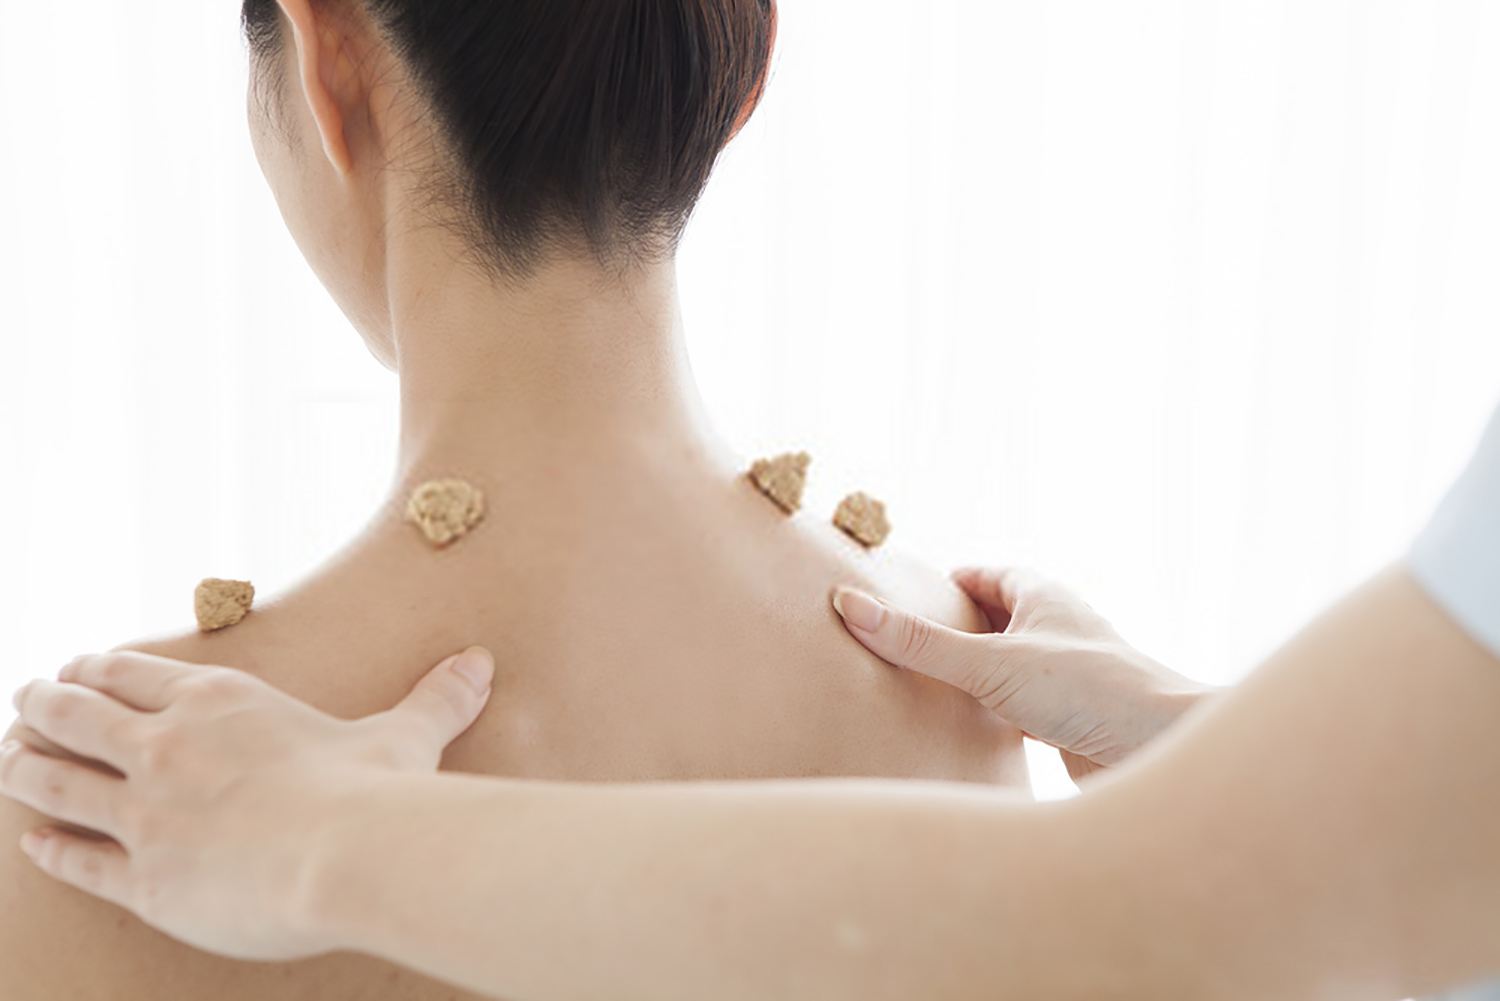 Moxibustion and Acupuncture for Stress Relief in Tao Acupuncture